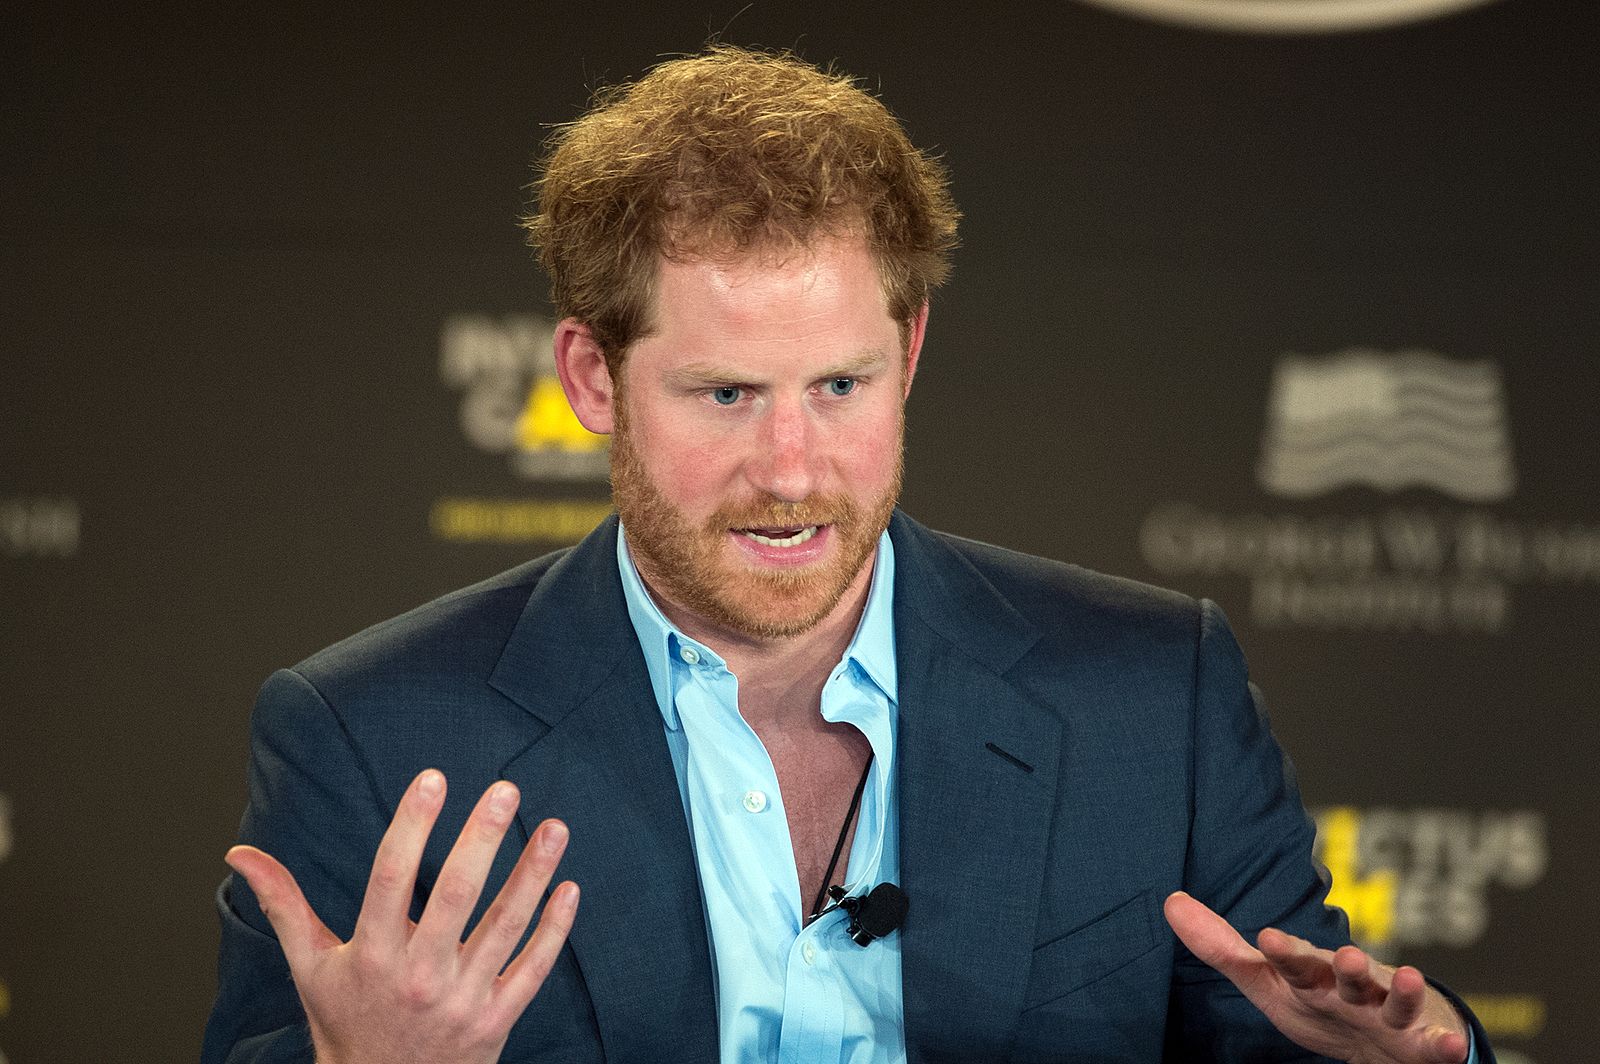 Prince Harry believes he can violate U.S. immigration laws, just like everyone else.